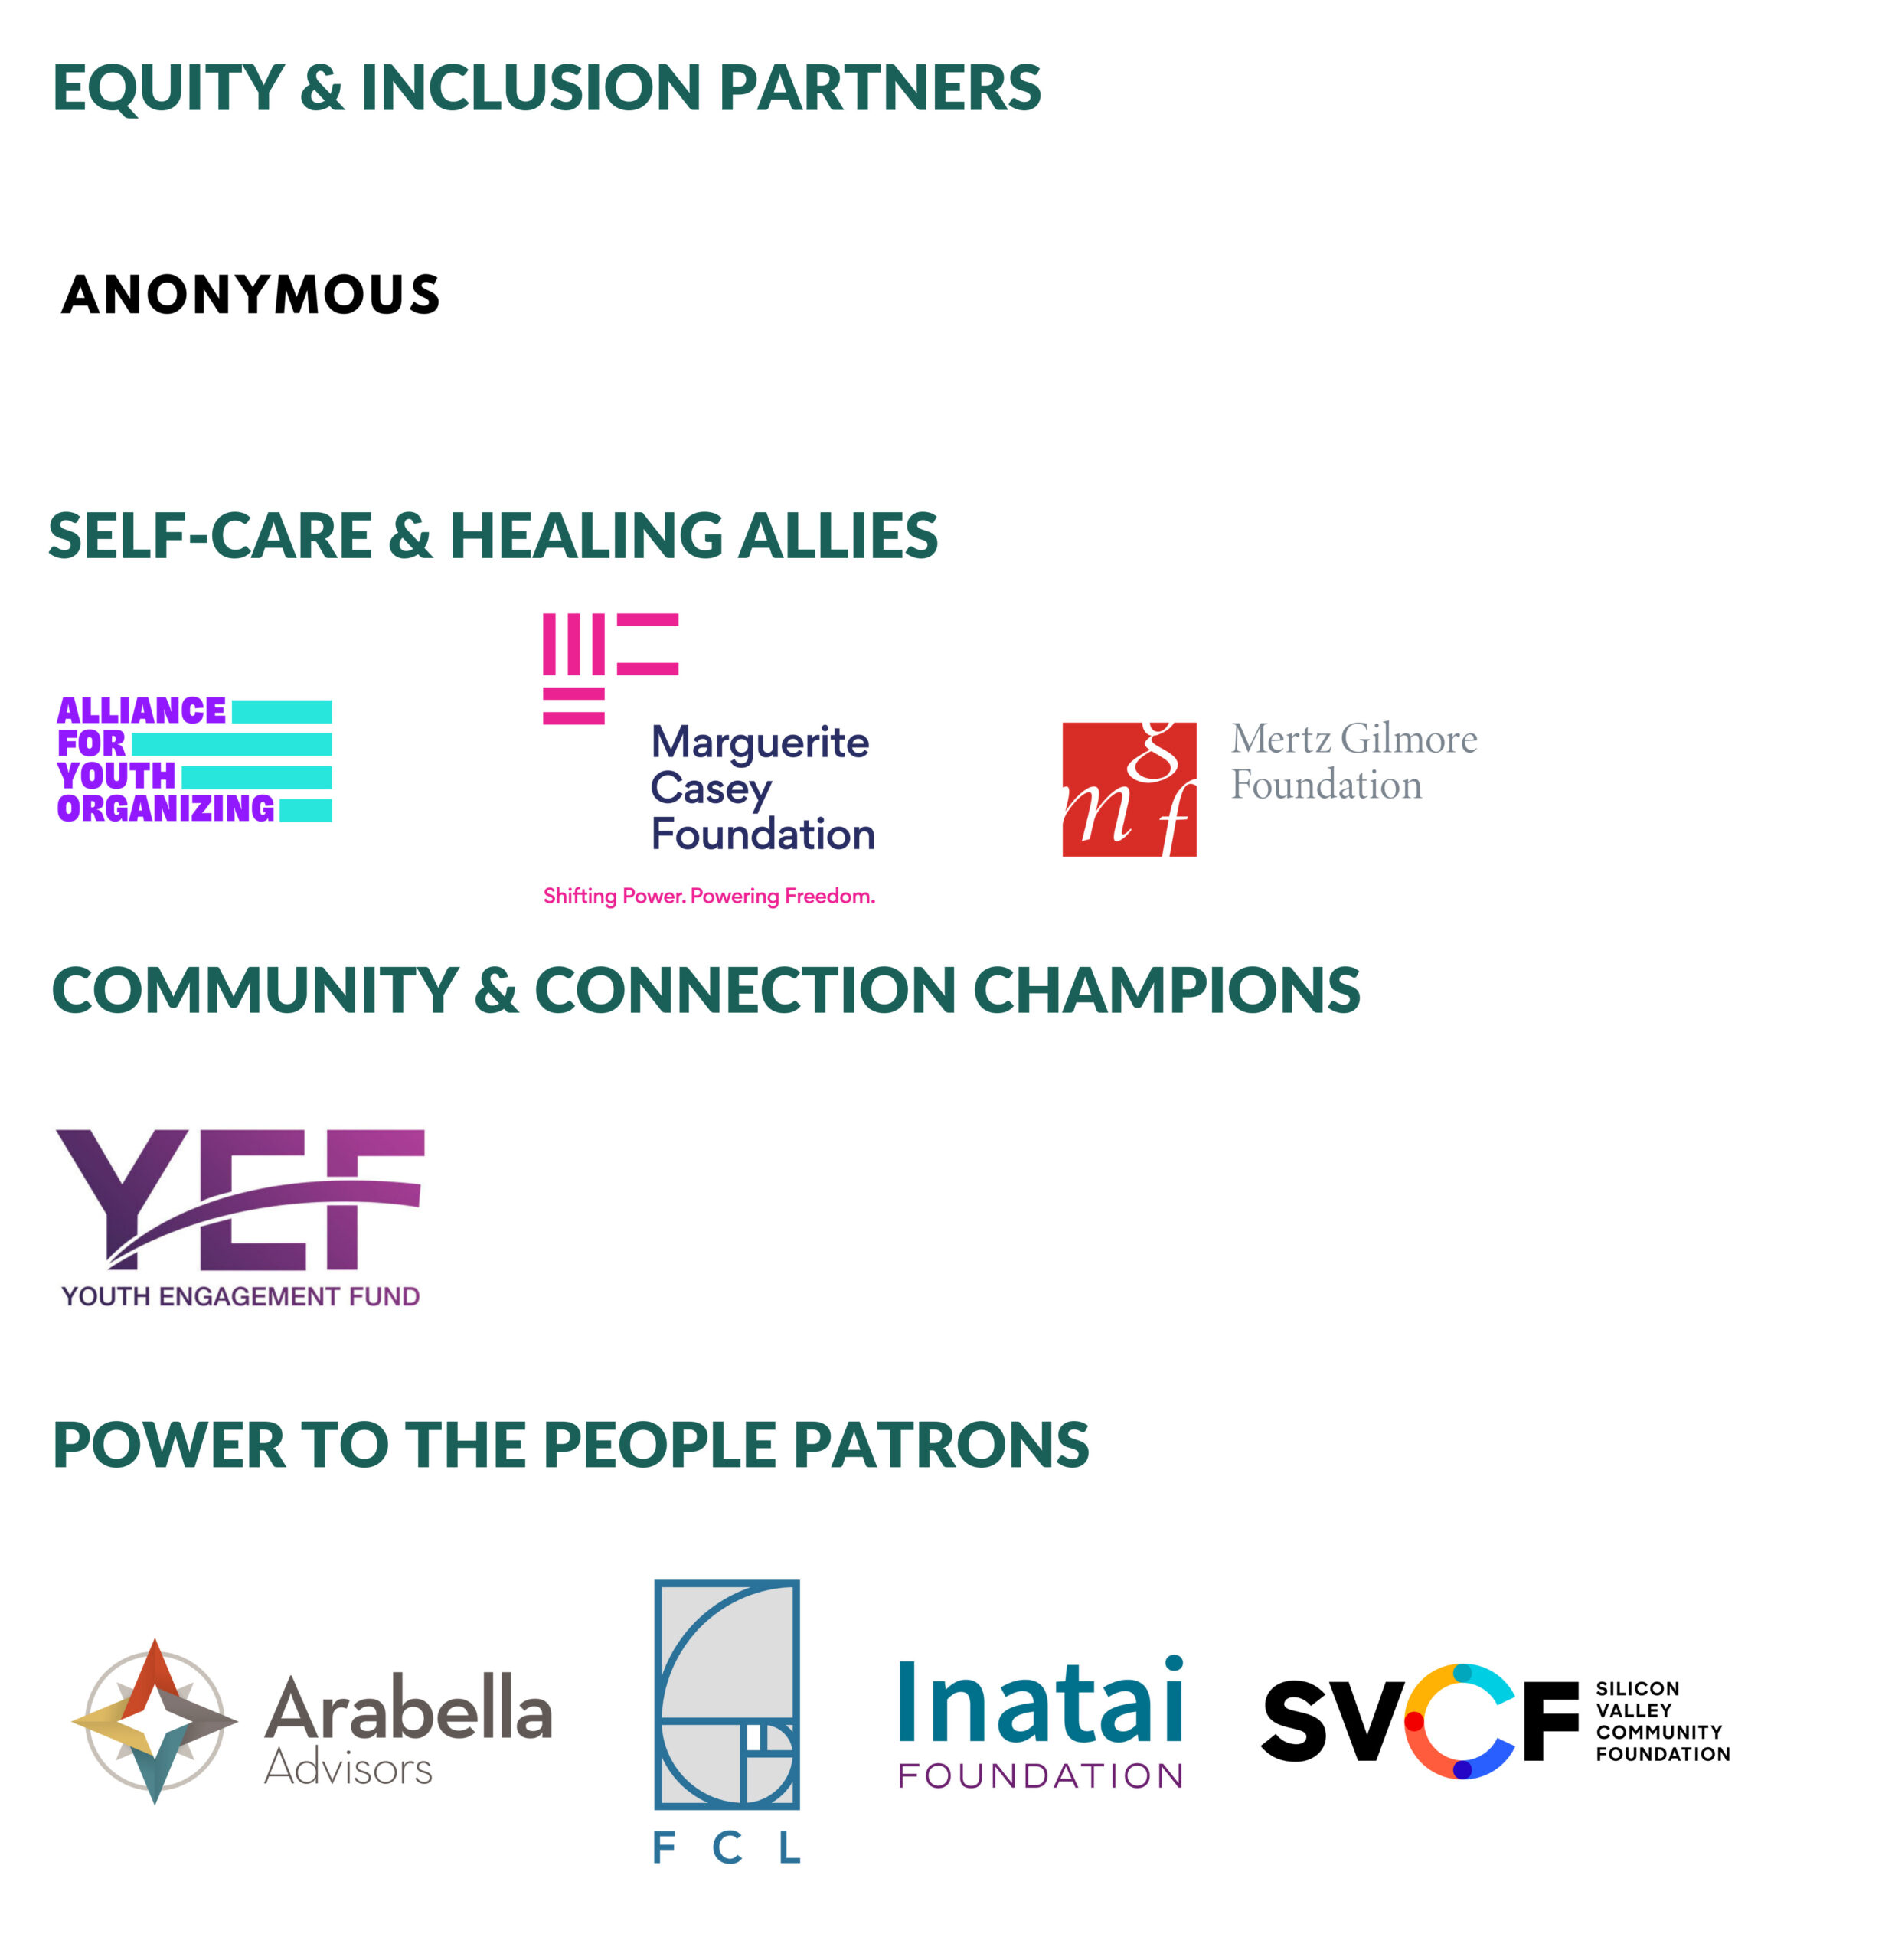 Equity & Inclusion Partners: Anonymous; Self-Care & Healing Allies: Alliance for Youth Organizing, Marguerite Casey Foundation, Mertz Gilmore Foundation. Community & Connection Champions: Youth Engagement Fund; Power to the People Patrons: Arabella Advisors, Foundation for Civic Leadership, Inatai Foundation, Silicon Valley Community Foundation